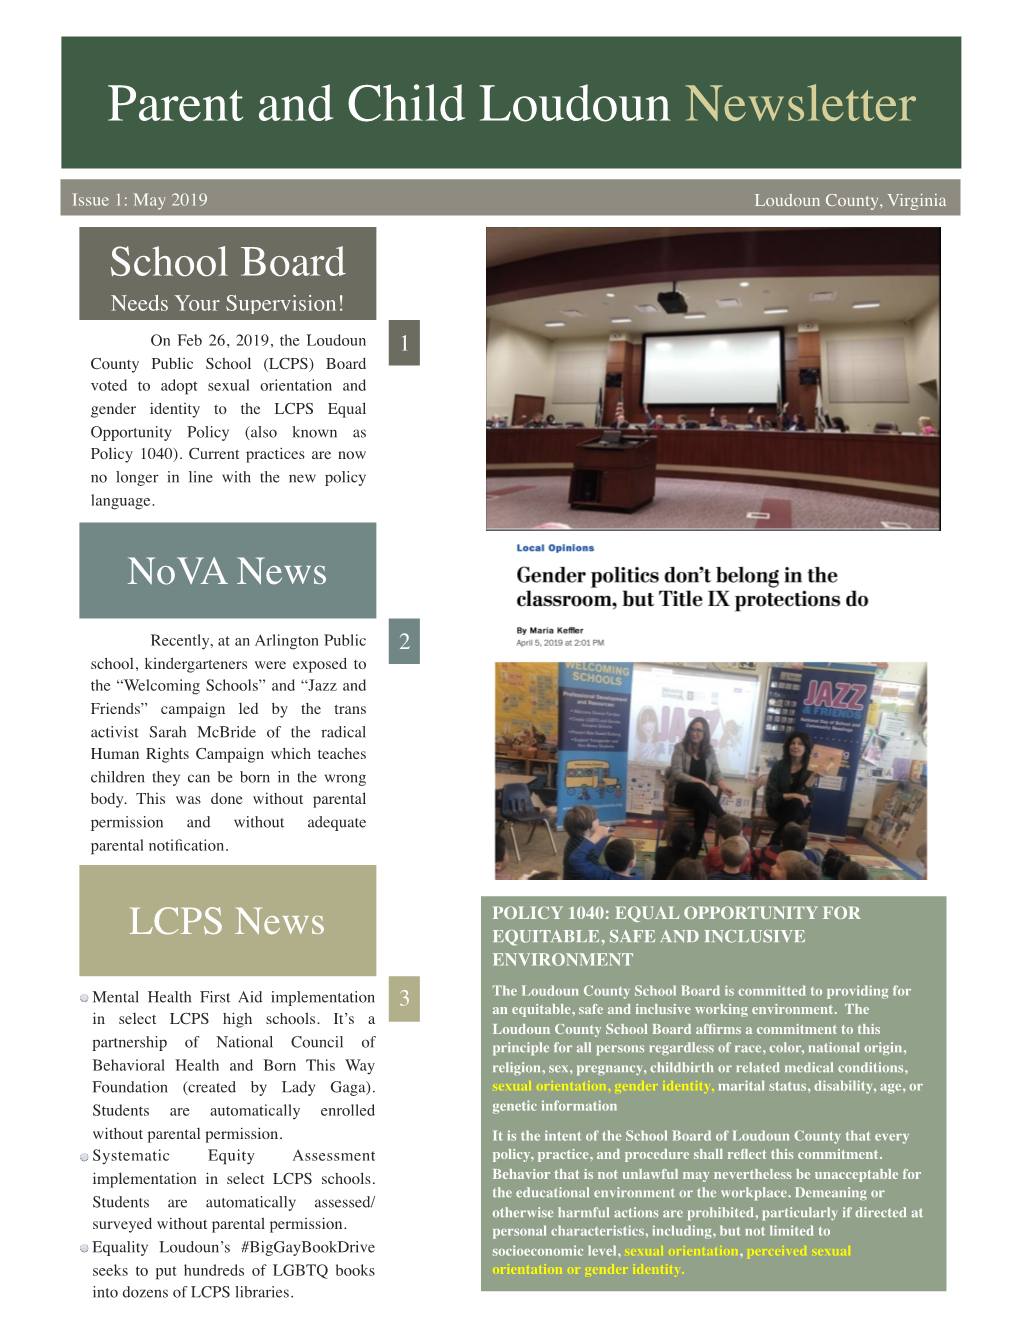 PACL Newsletter Second Draft 20190520